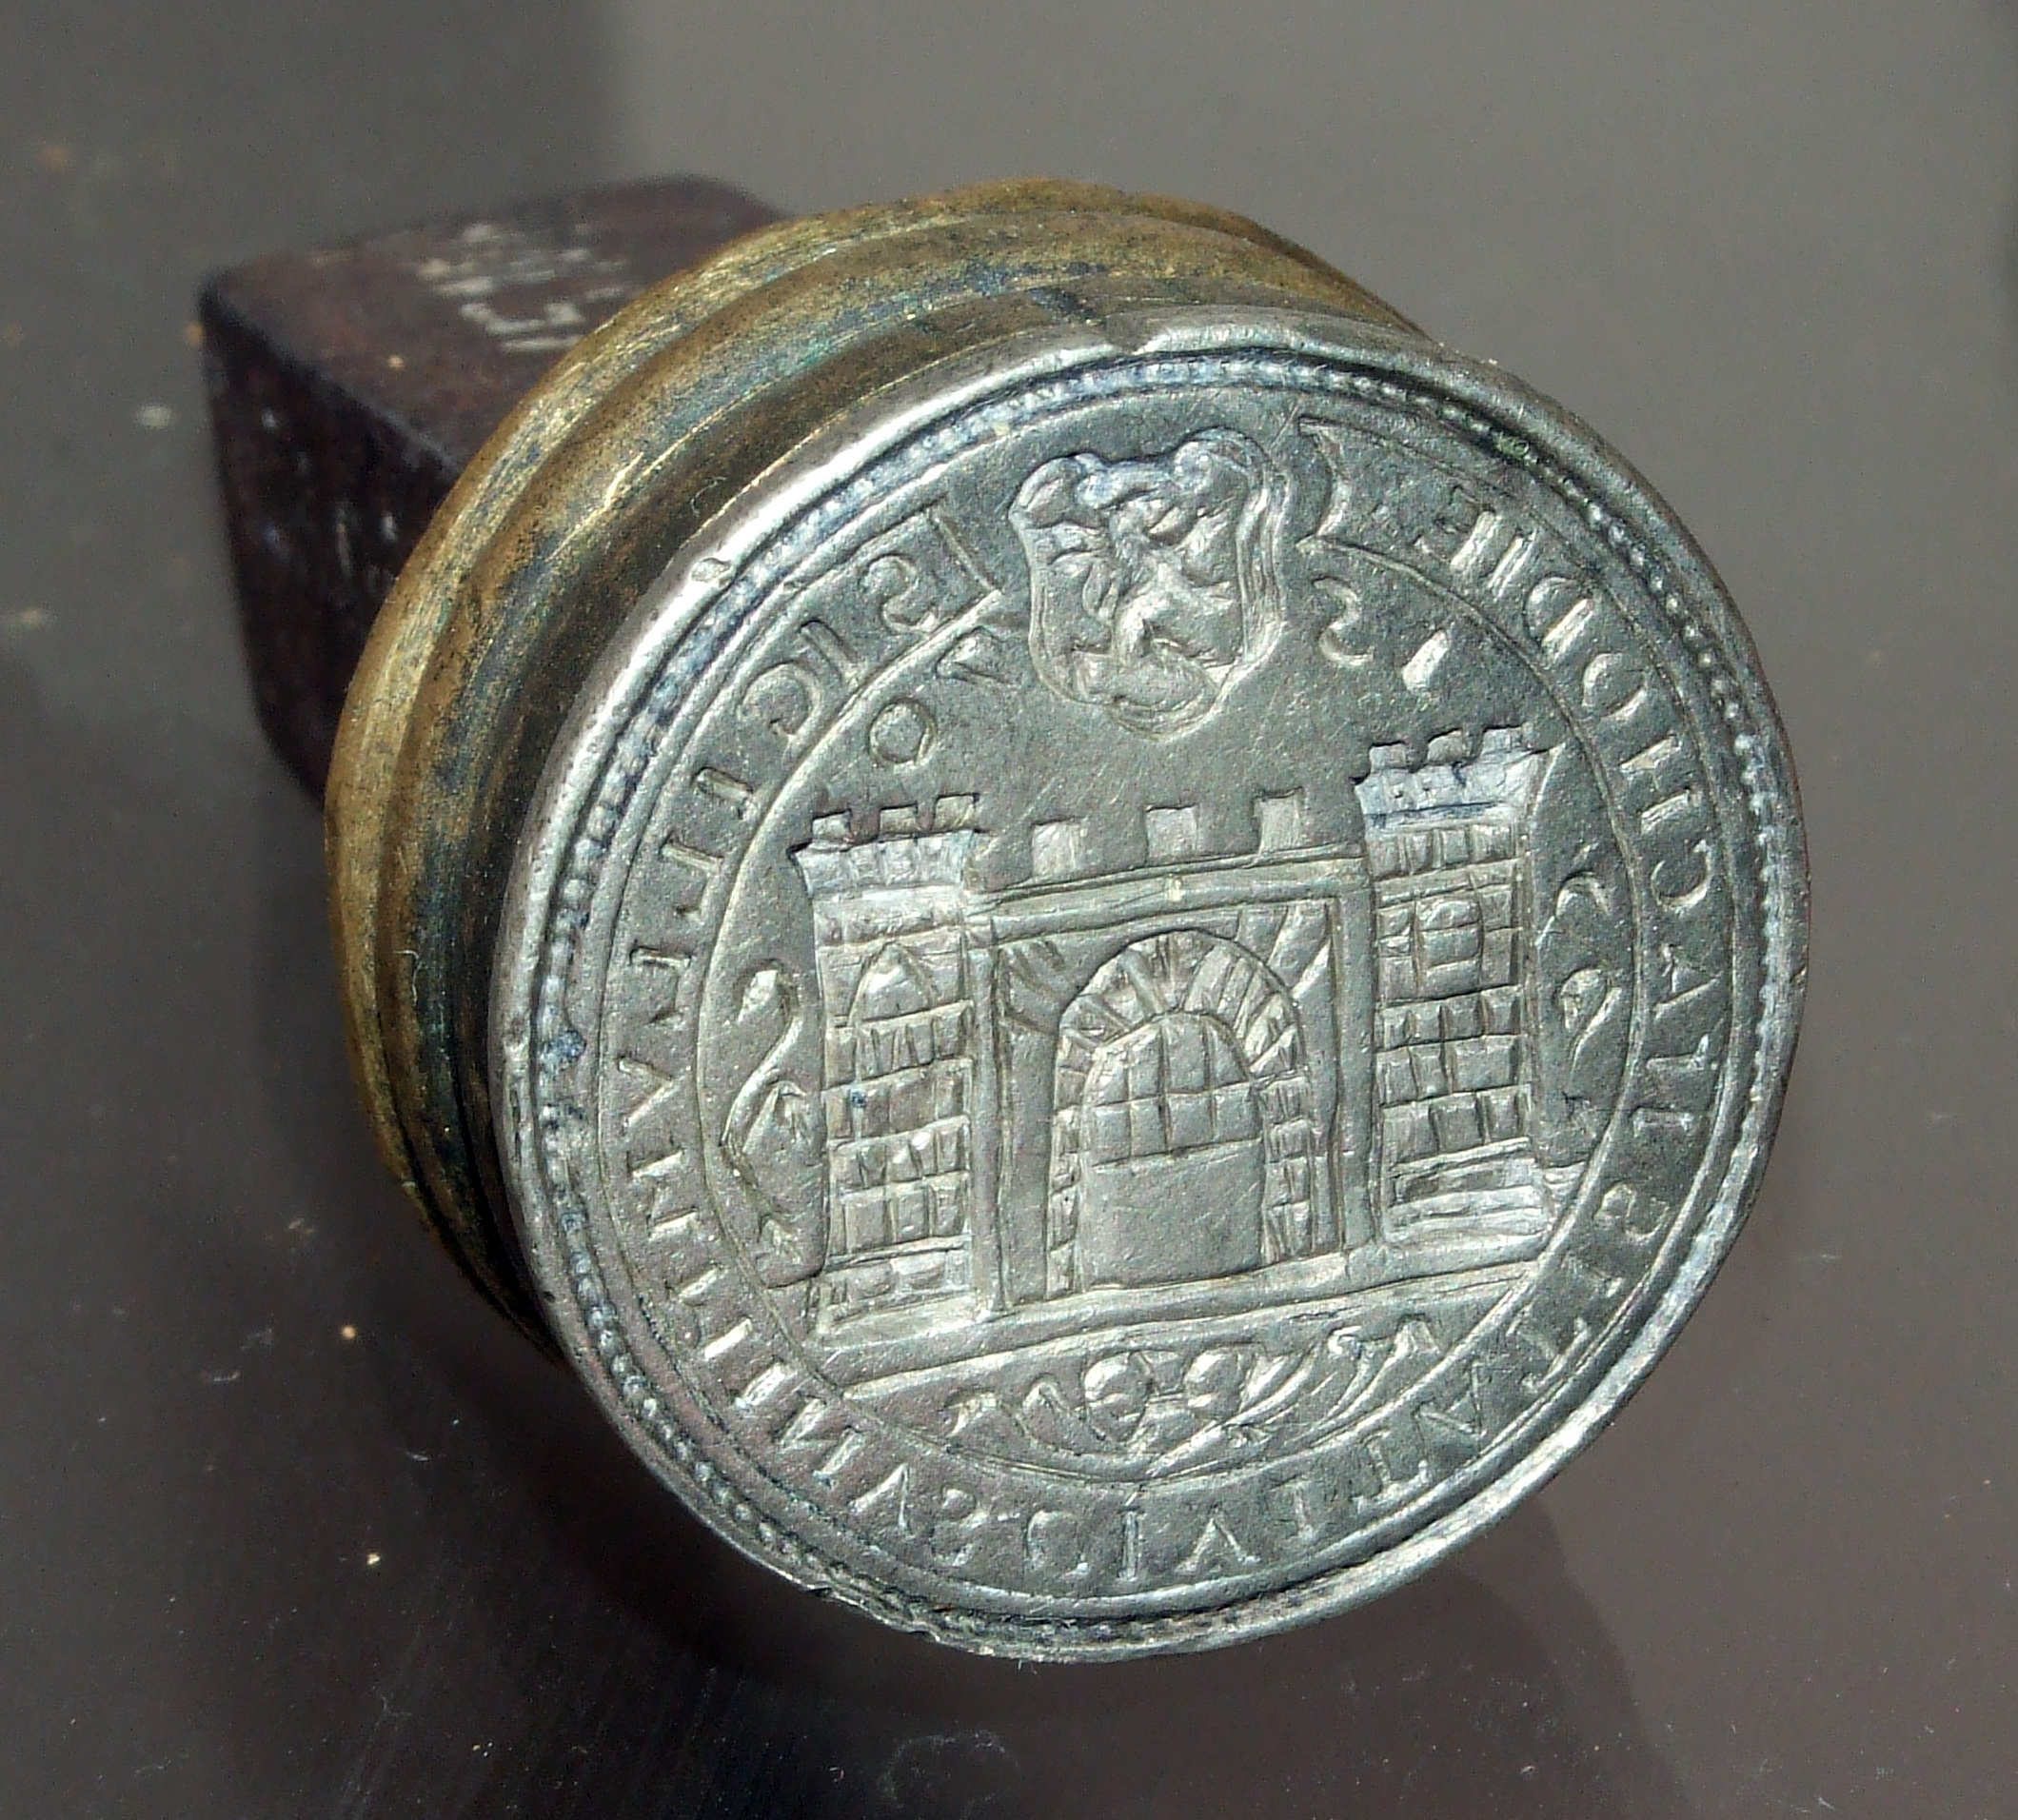 Seal of Náchod town from 1570 (small)